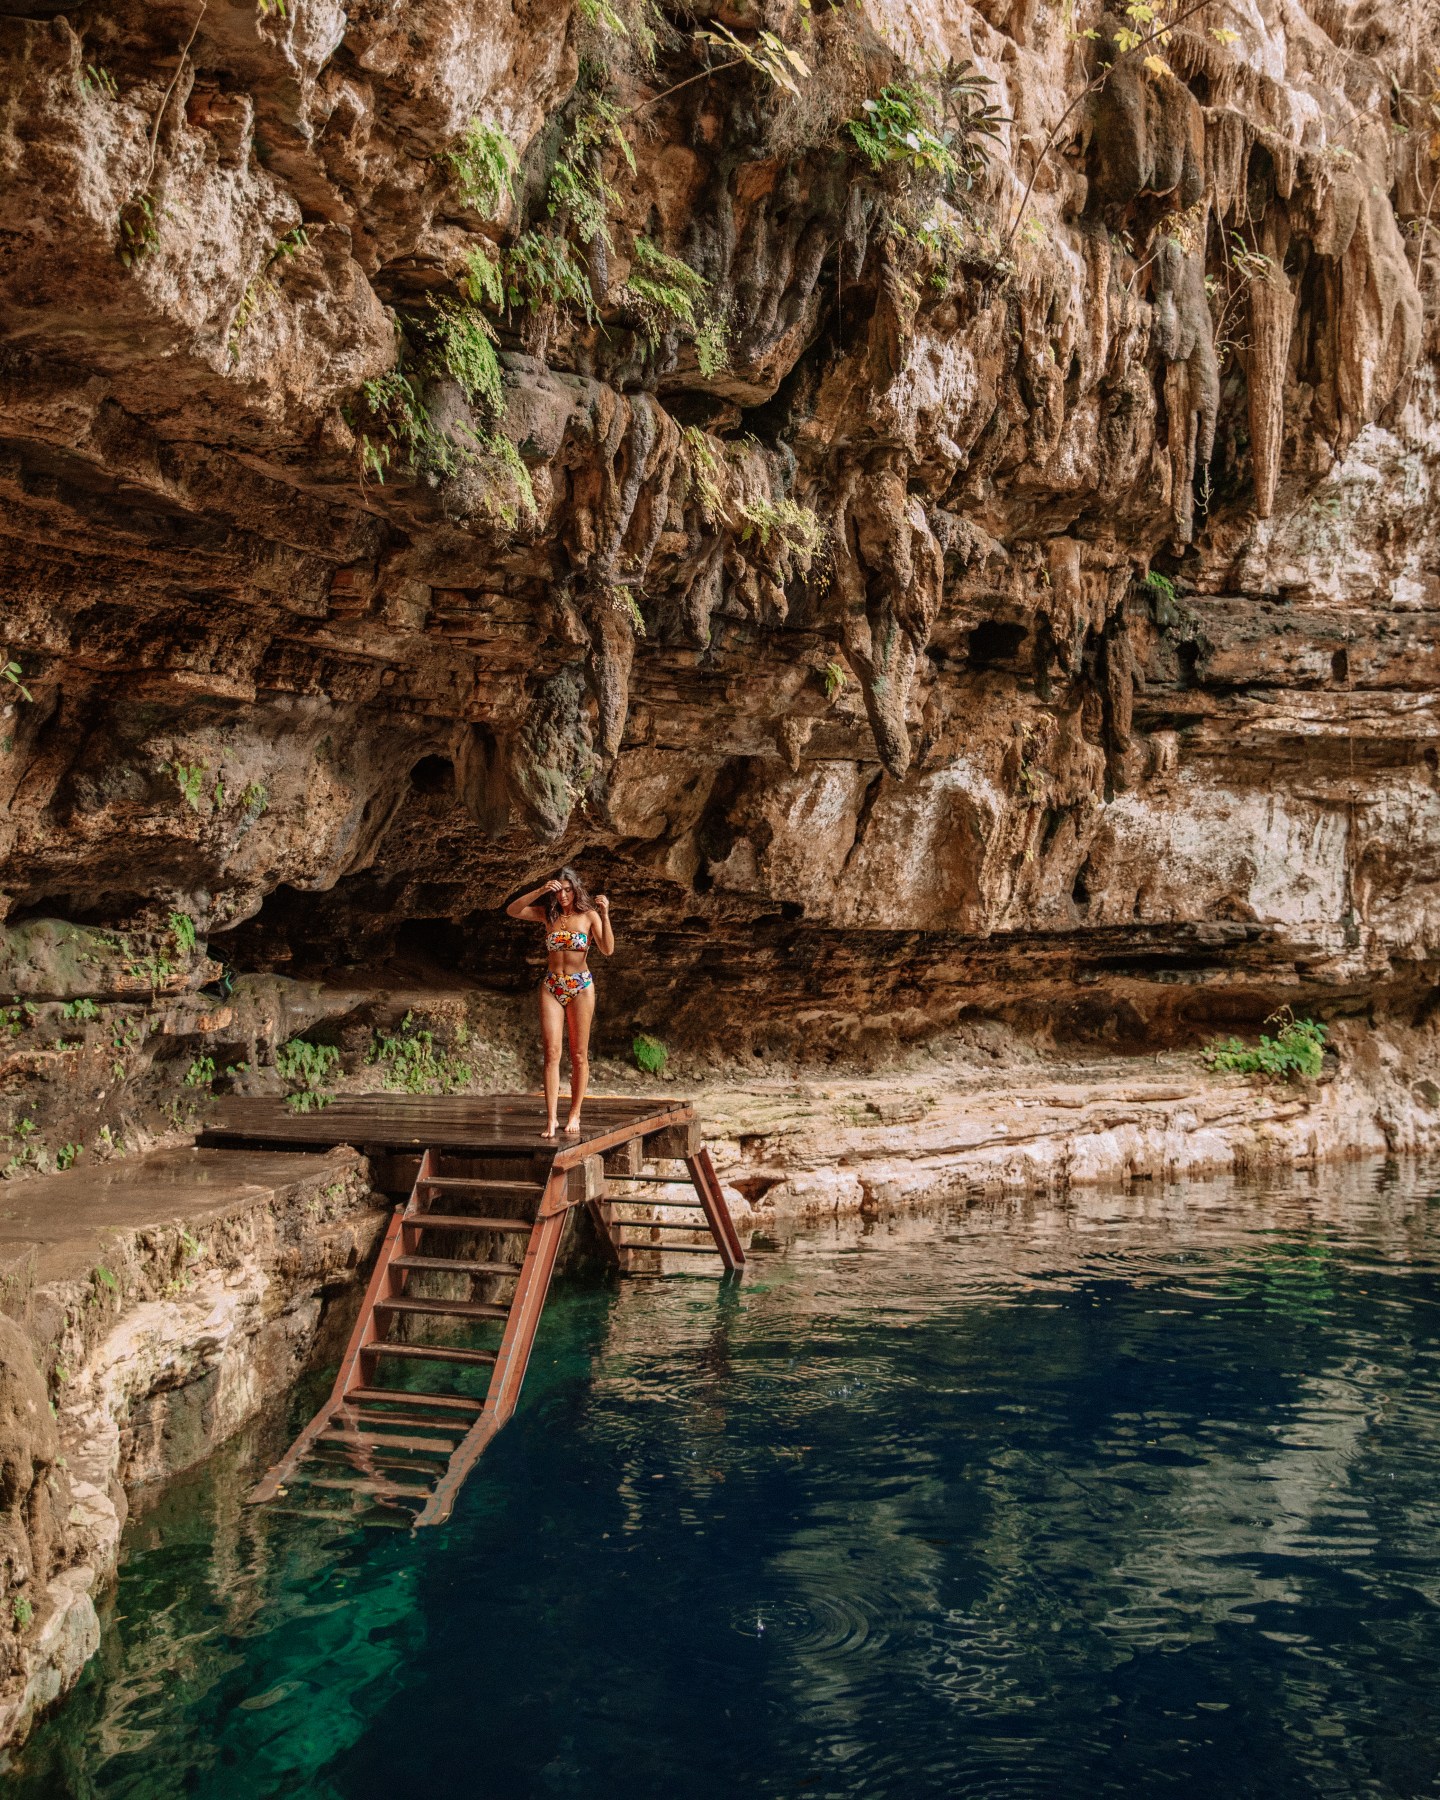 Oxman Cenote Yucatan. This guide gives you tips for all of the best cenotes in Tulum and the best cenotes near Tulum including what to pack for the best Tulum cenotes and more. If you are looking for day trips from Tulum, check out the best cenotes in Quintana Roo and best cenotes in Yucatan for ideas! | Tulum cenotes photography | cenotes Mexico tulum | cenotes tulum riviera maya | best cenotes in quintana roo | cenotes quintana roo | cenotes in playa del carmen